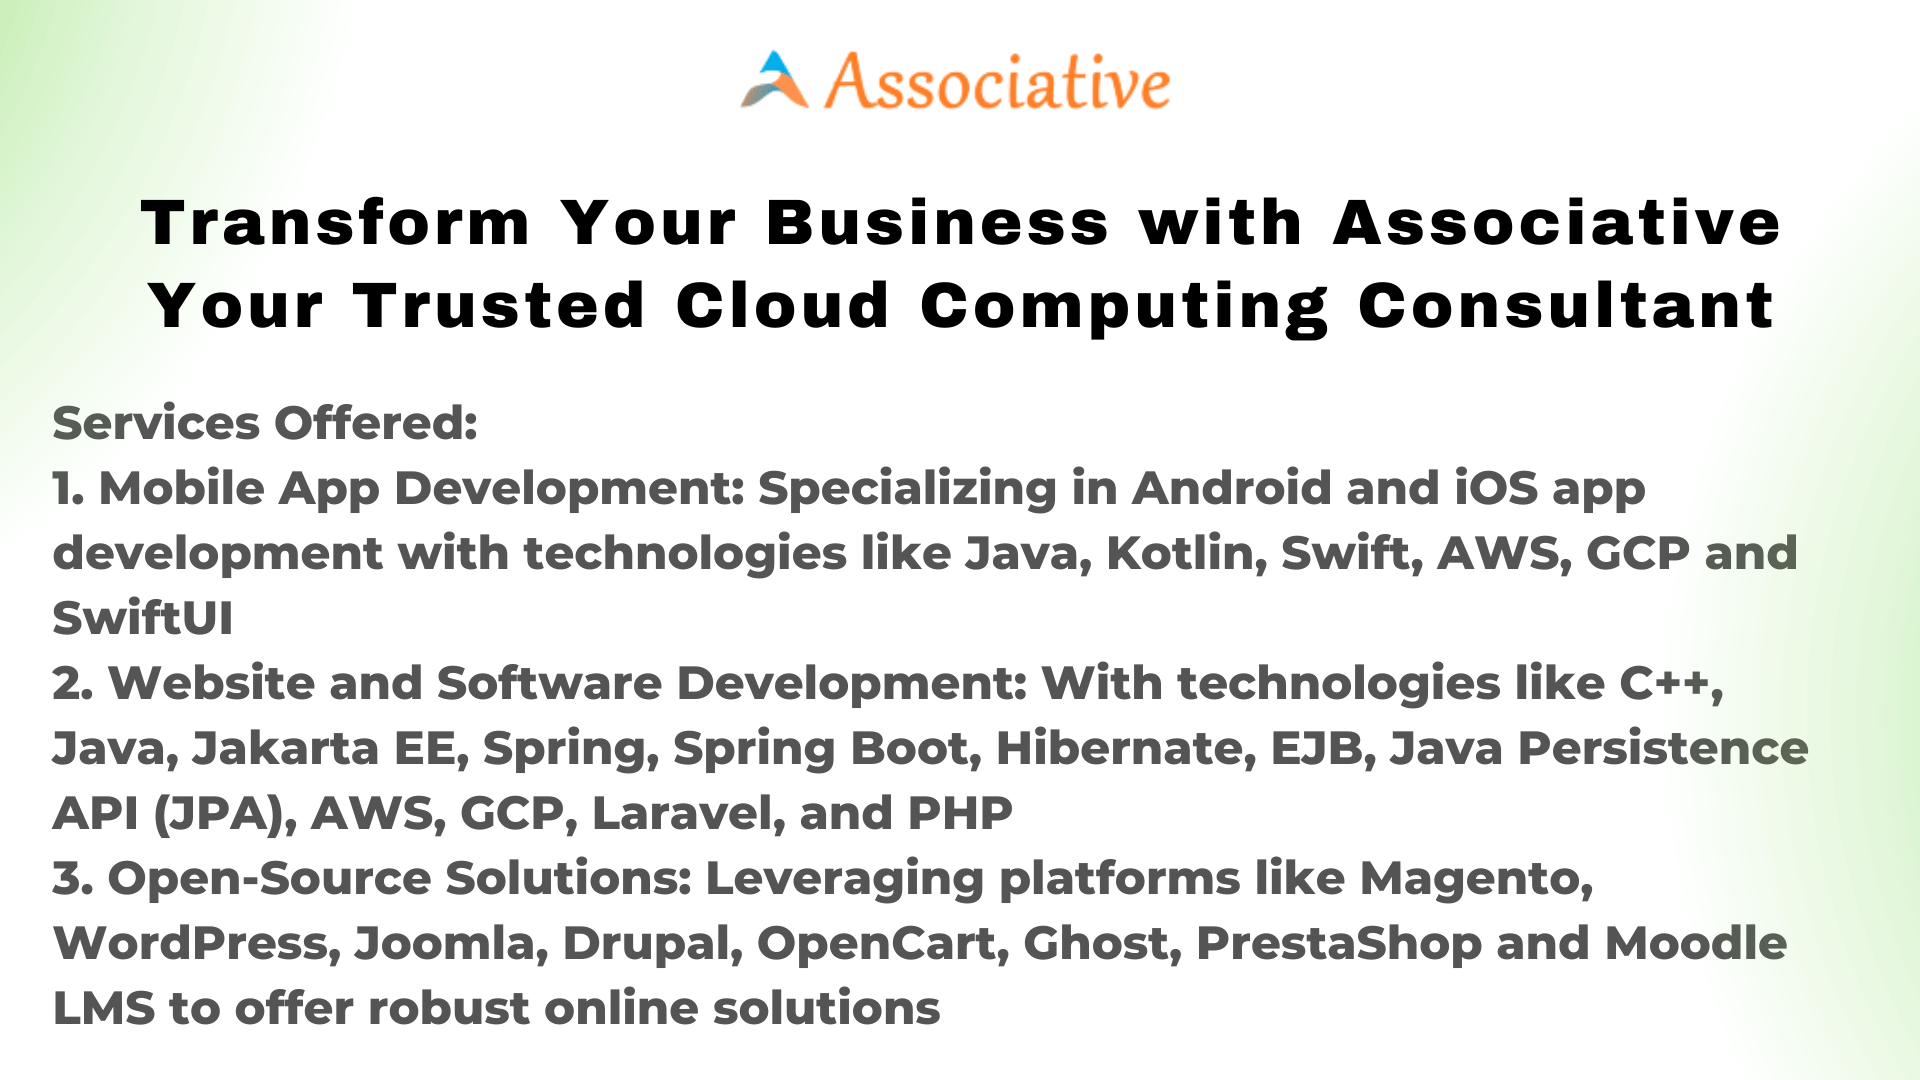 Transform Your Business with Associative Your Trusted Cloud Computing Consultant